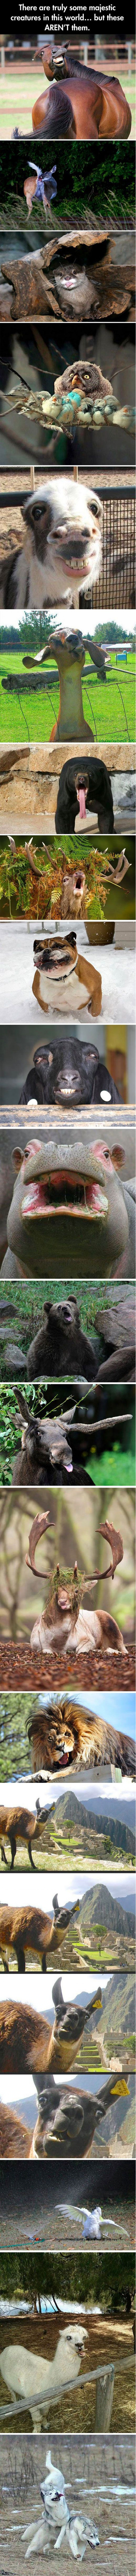 The Unmajestic Side Of Nature That Will Make You Laugh